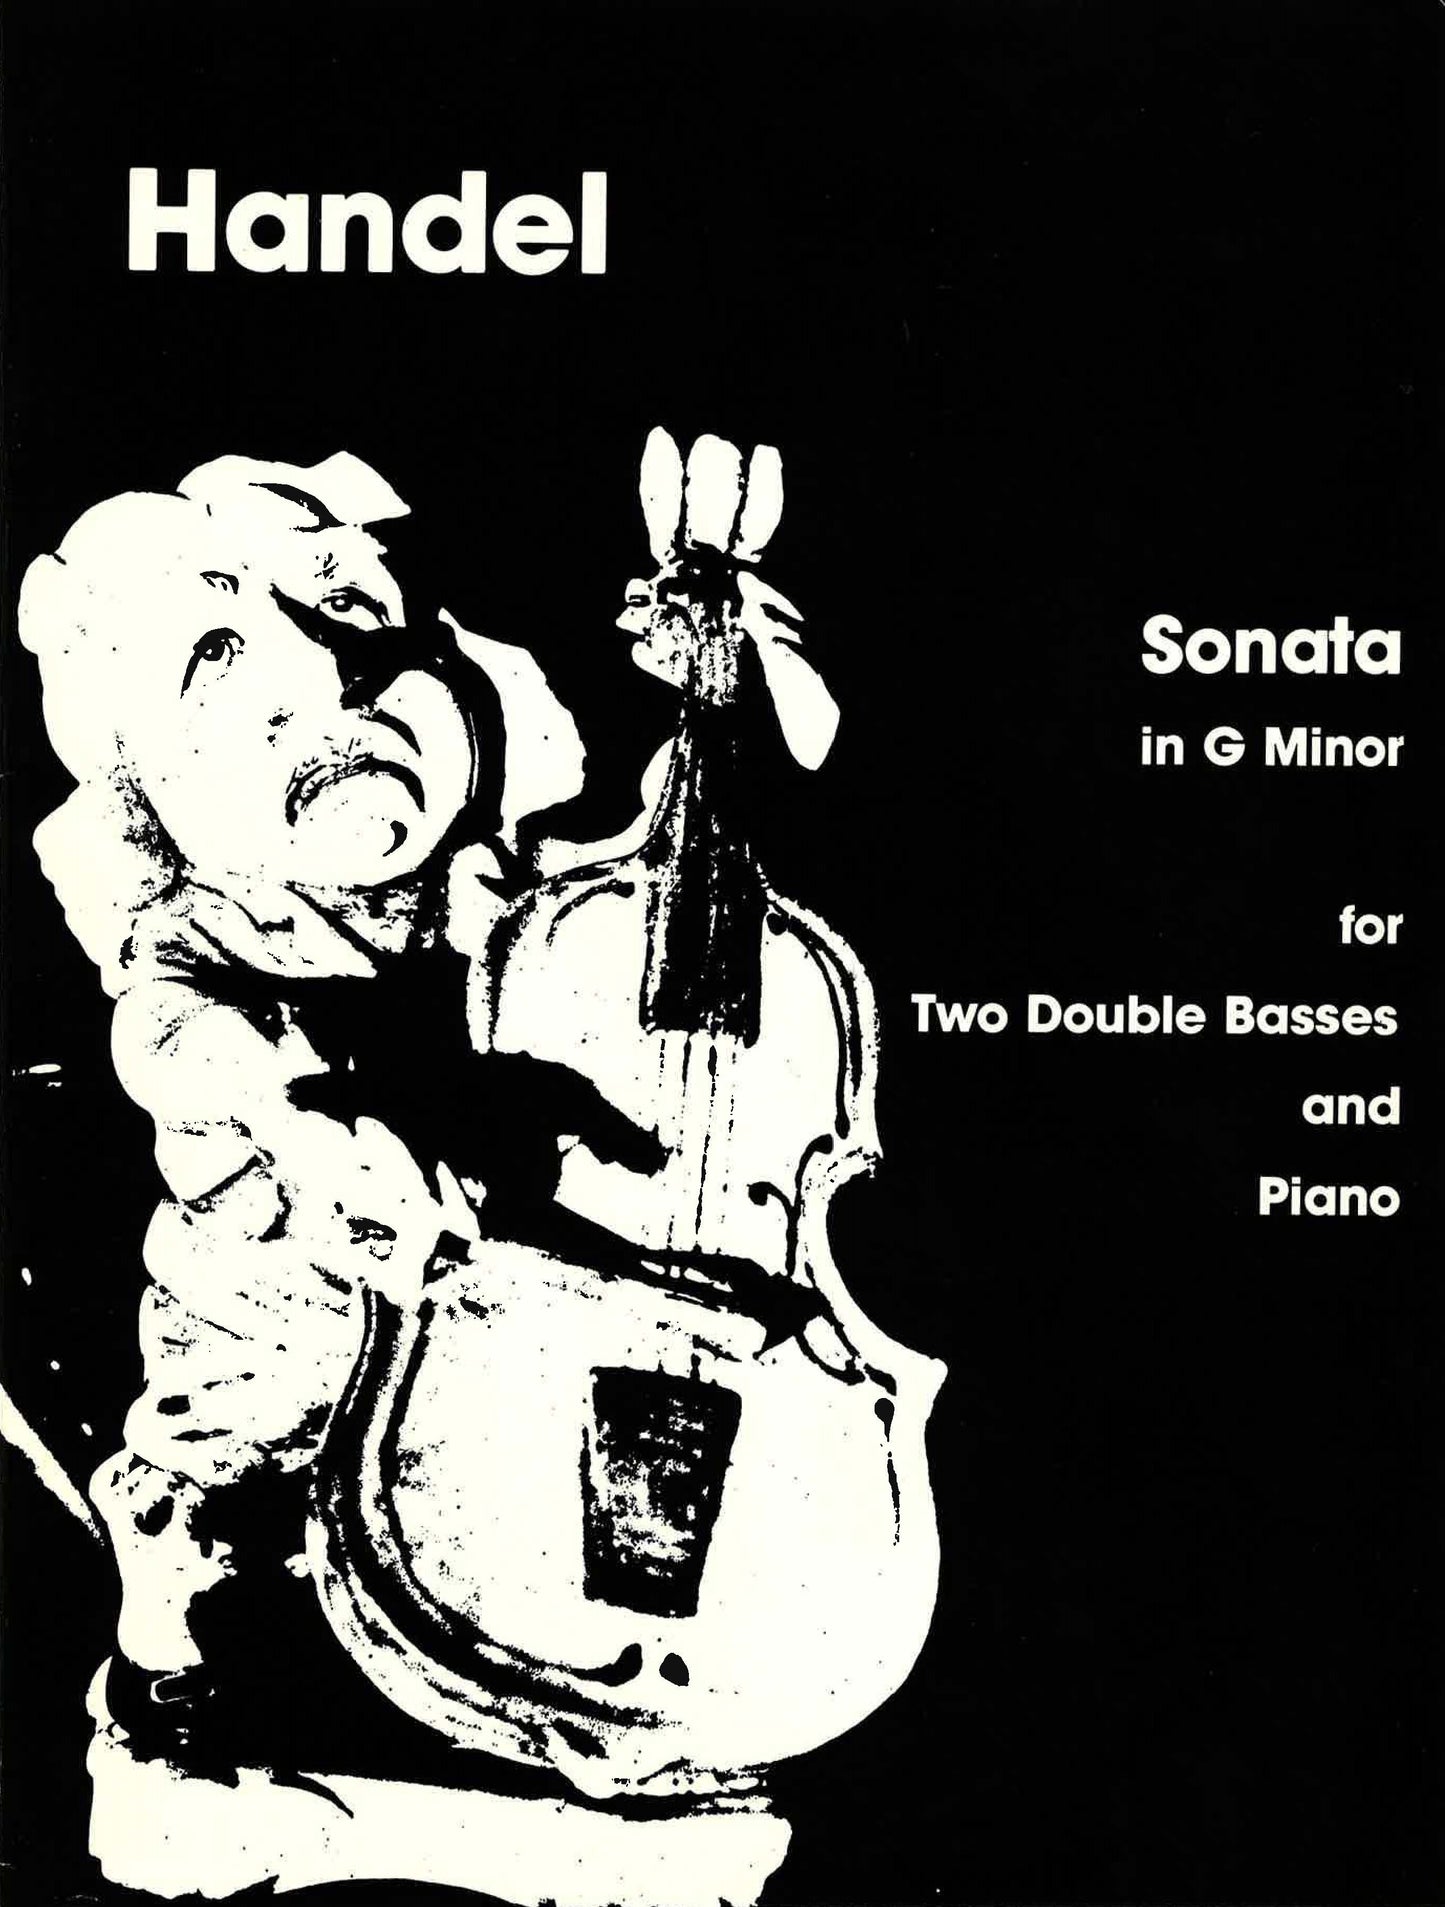 Handel: Sonata in G Minor for Two Double Basses and Piano